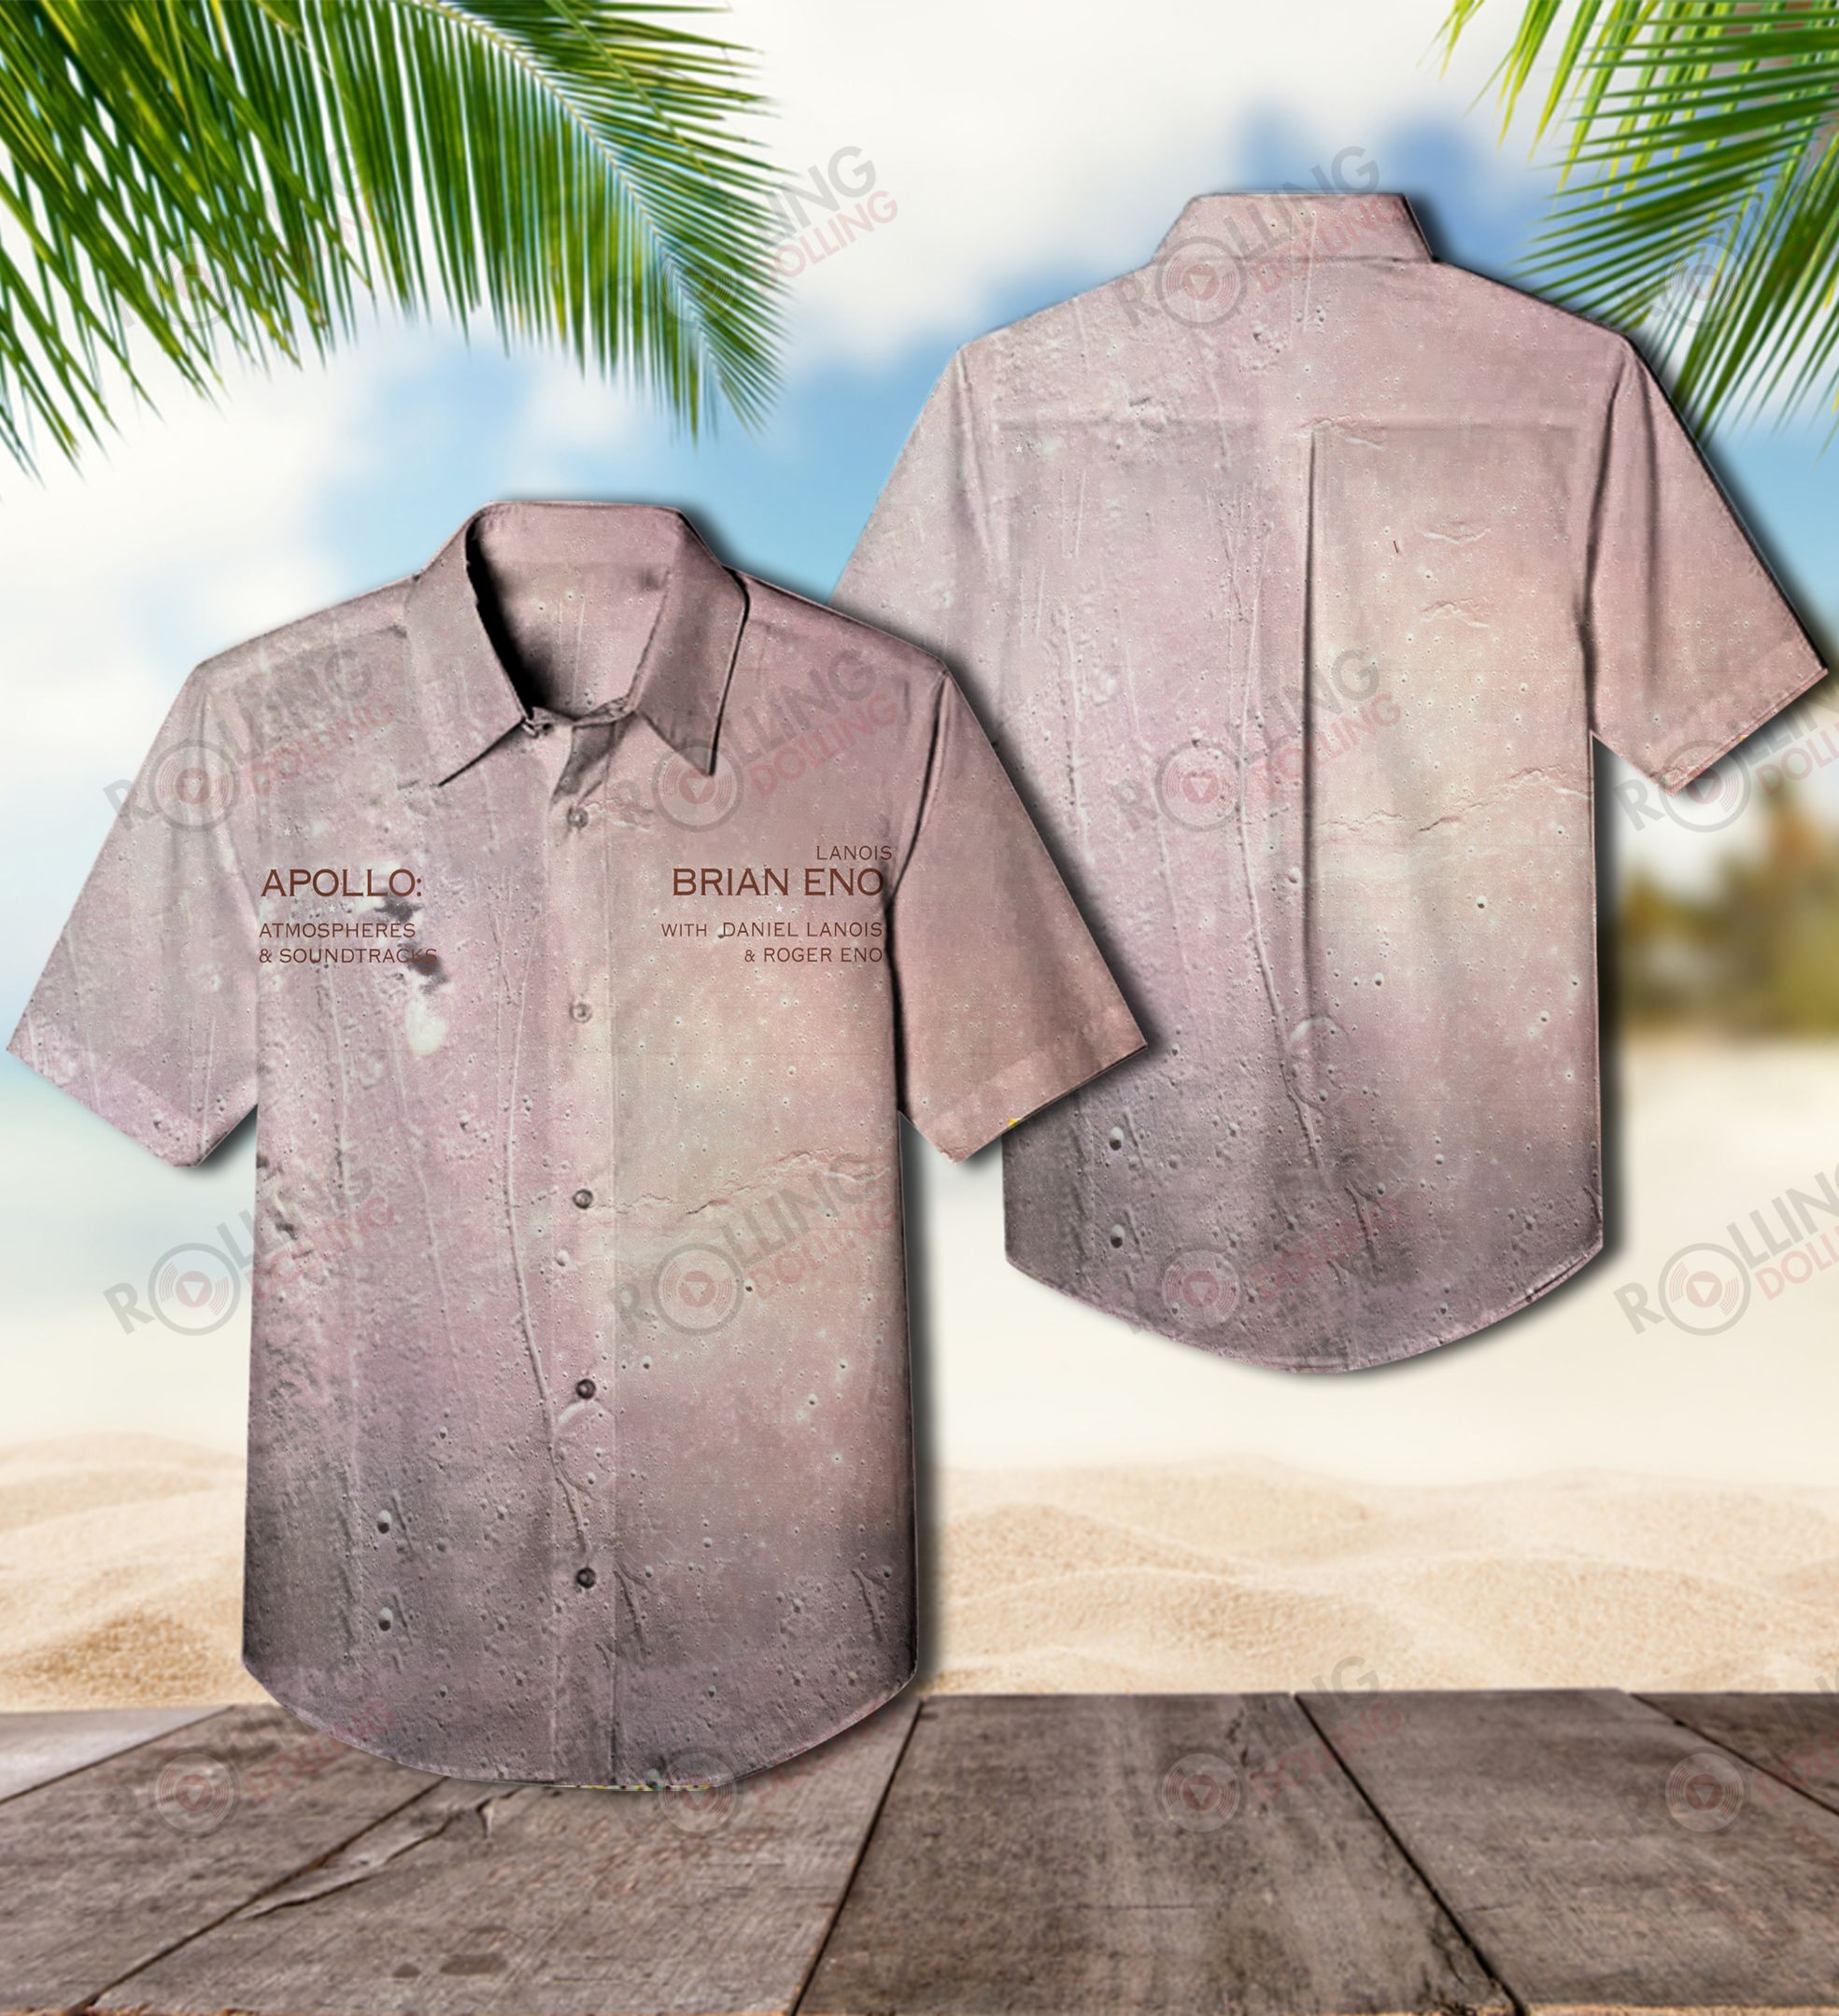 We have compiled a list of some of the best Hawaiian shirt that are available 57